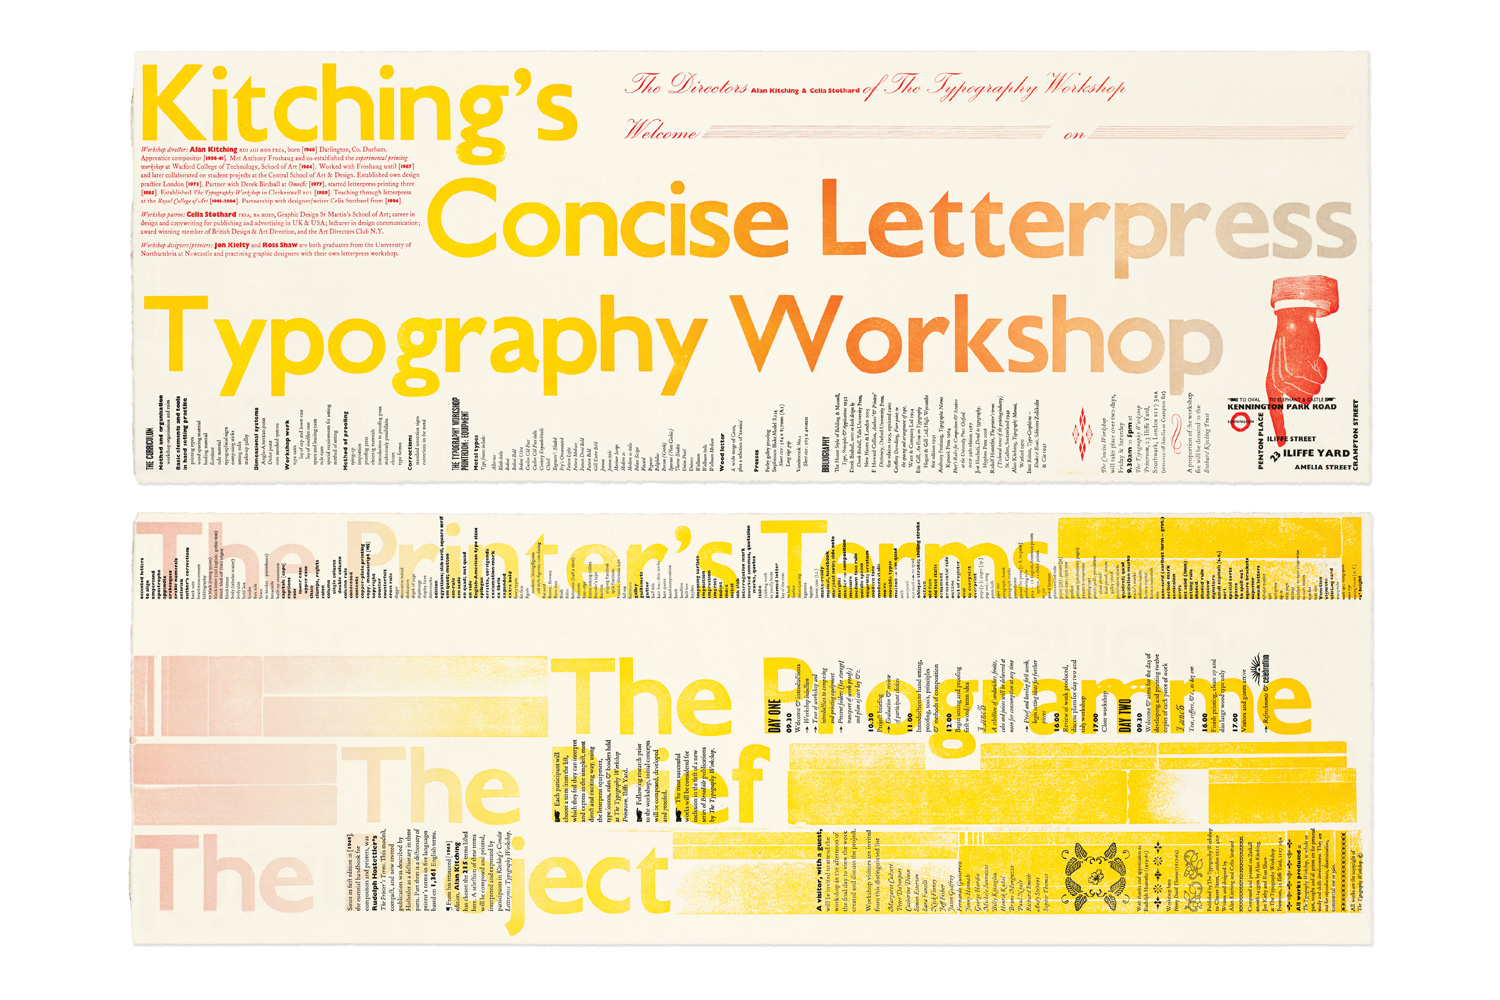 Kitching's Concise letterpress typography workshop prospectus